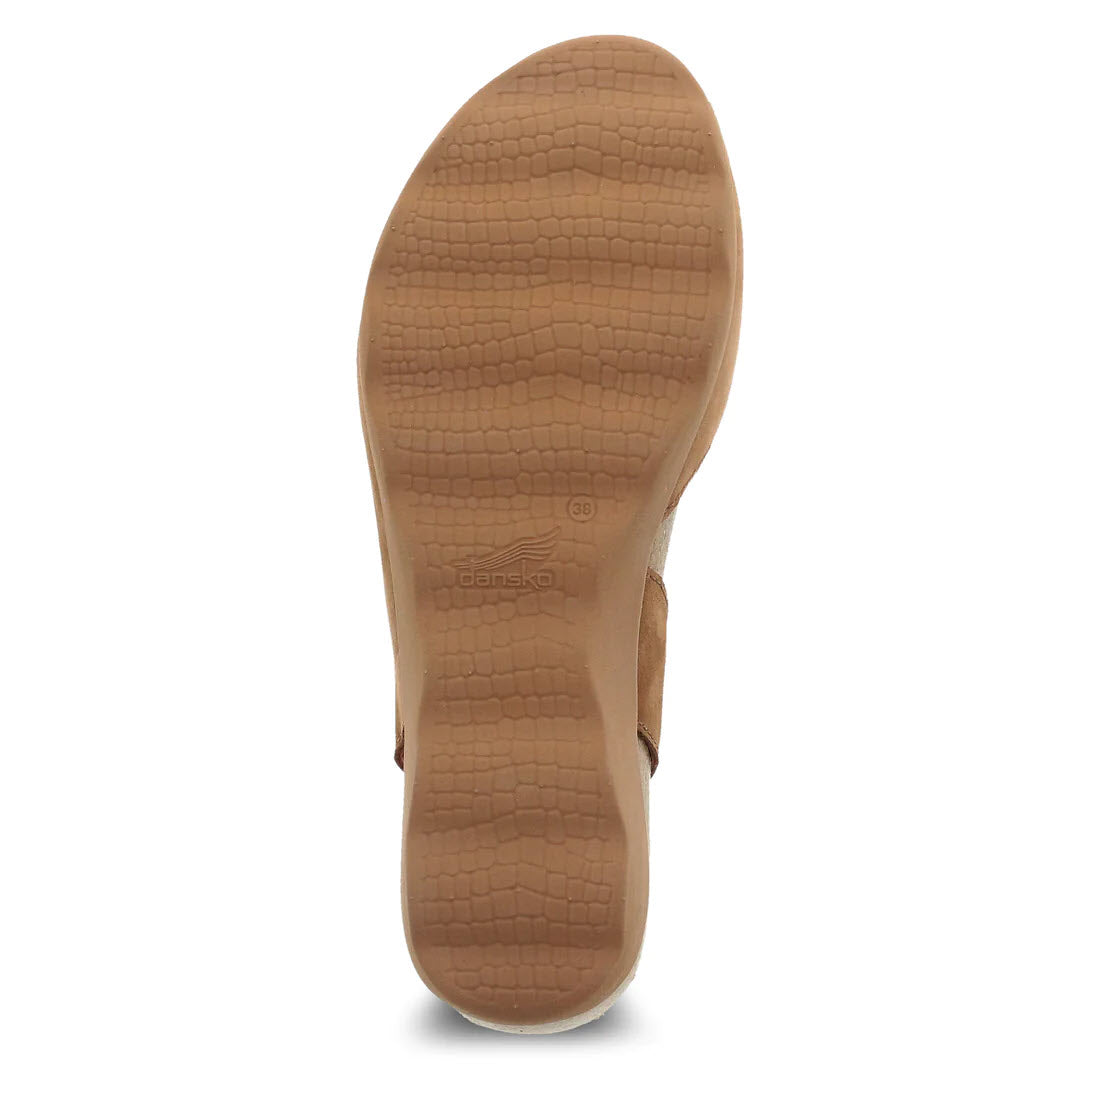 Bottom view of a Dansko Marcy Tan Nubuck - Womens shoe showing the lightweight EVA outsole with a visible Dansko brand imprint.